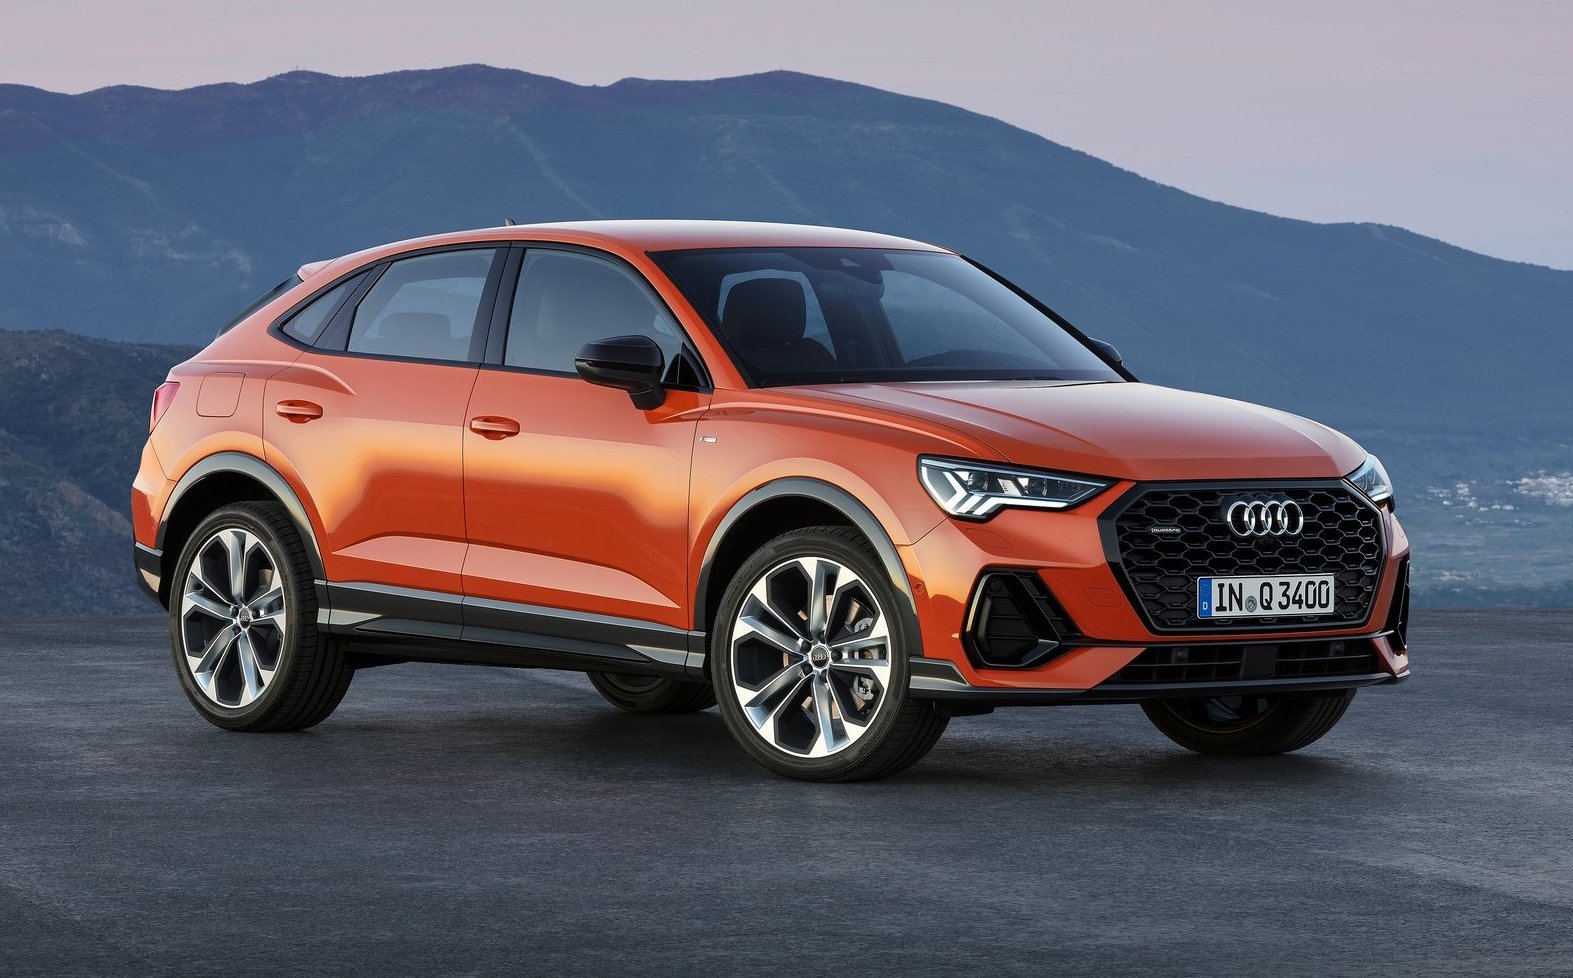 2020 Audi Q3 Sportback now on sale in Australia from $49,900